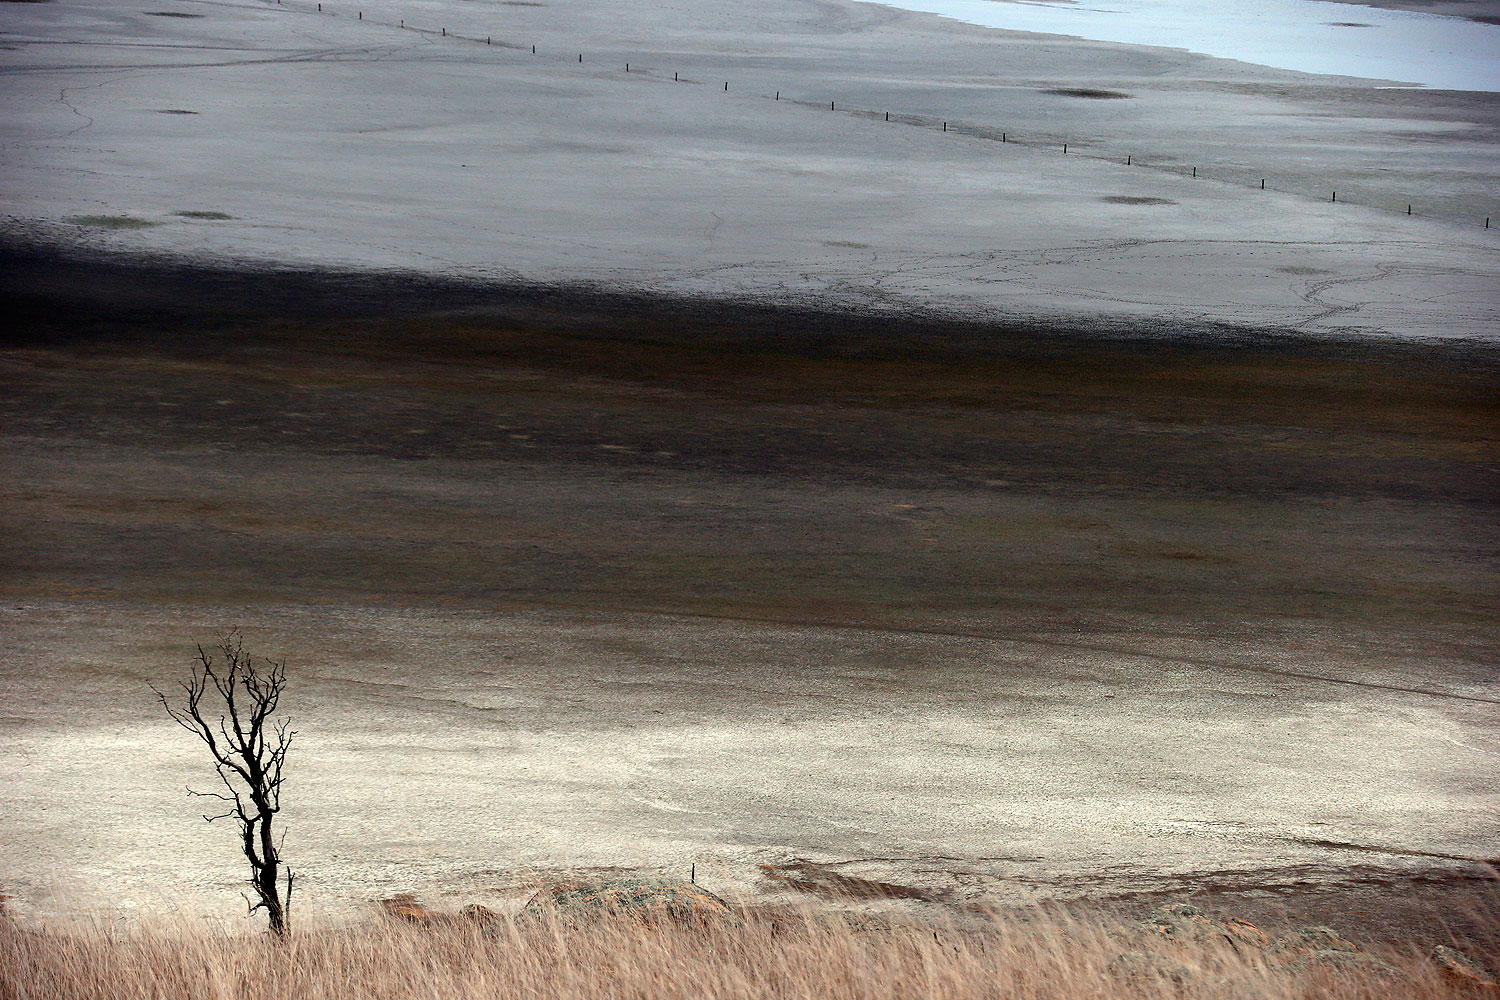 A dead tree stands in front of shallow water and a dried-up area of Lake George, located 50 km (31 miles) north of the Australian capital city of Canberra May 13, 2013